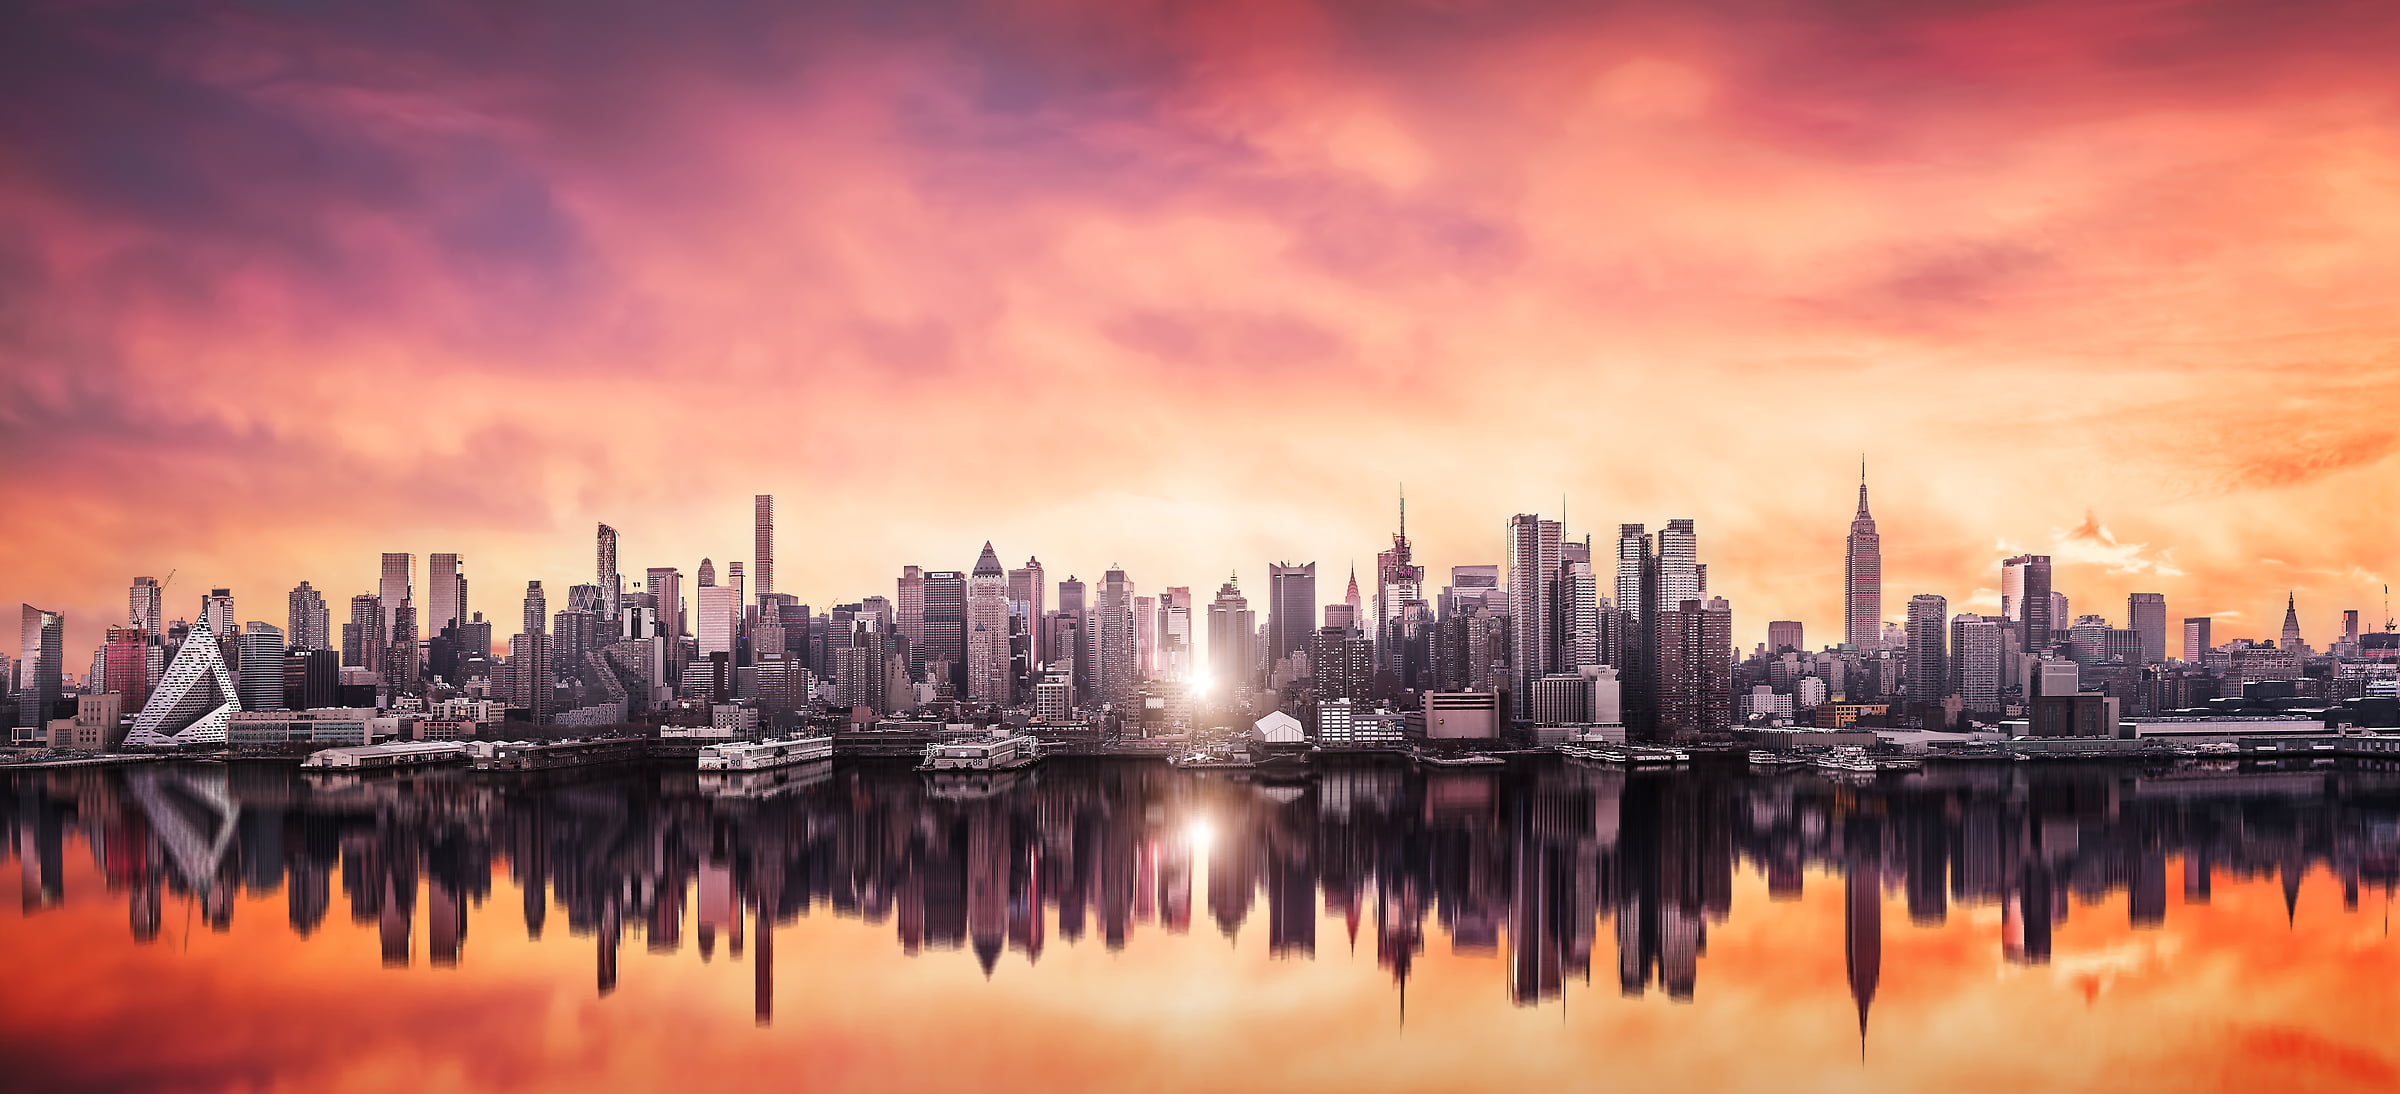 672 megapixels! A very high definition cityscape VAST photo of Manhattanhenge sunrise among the Midtown Manhattan city skyline skyscrapers; created in New York City by Dan Piech.